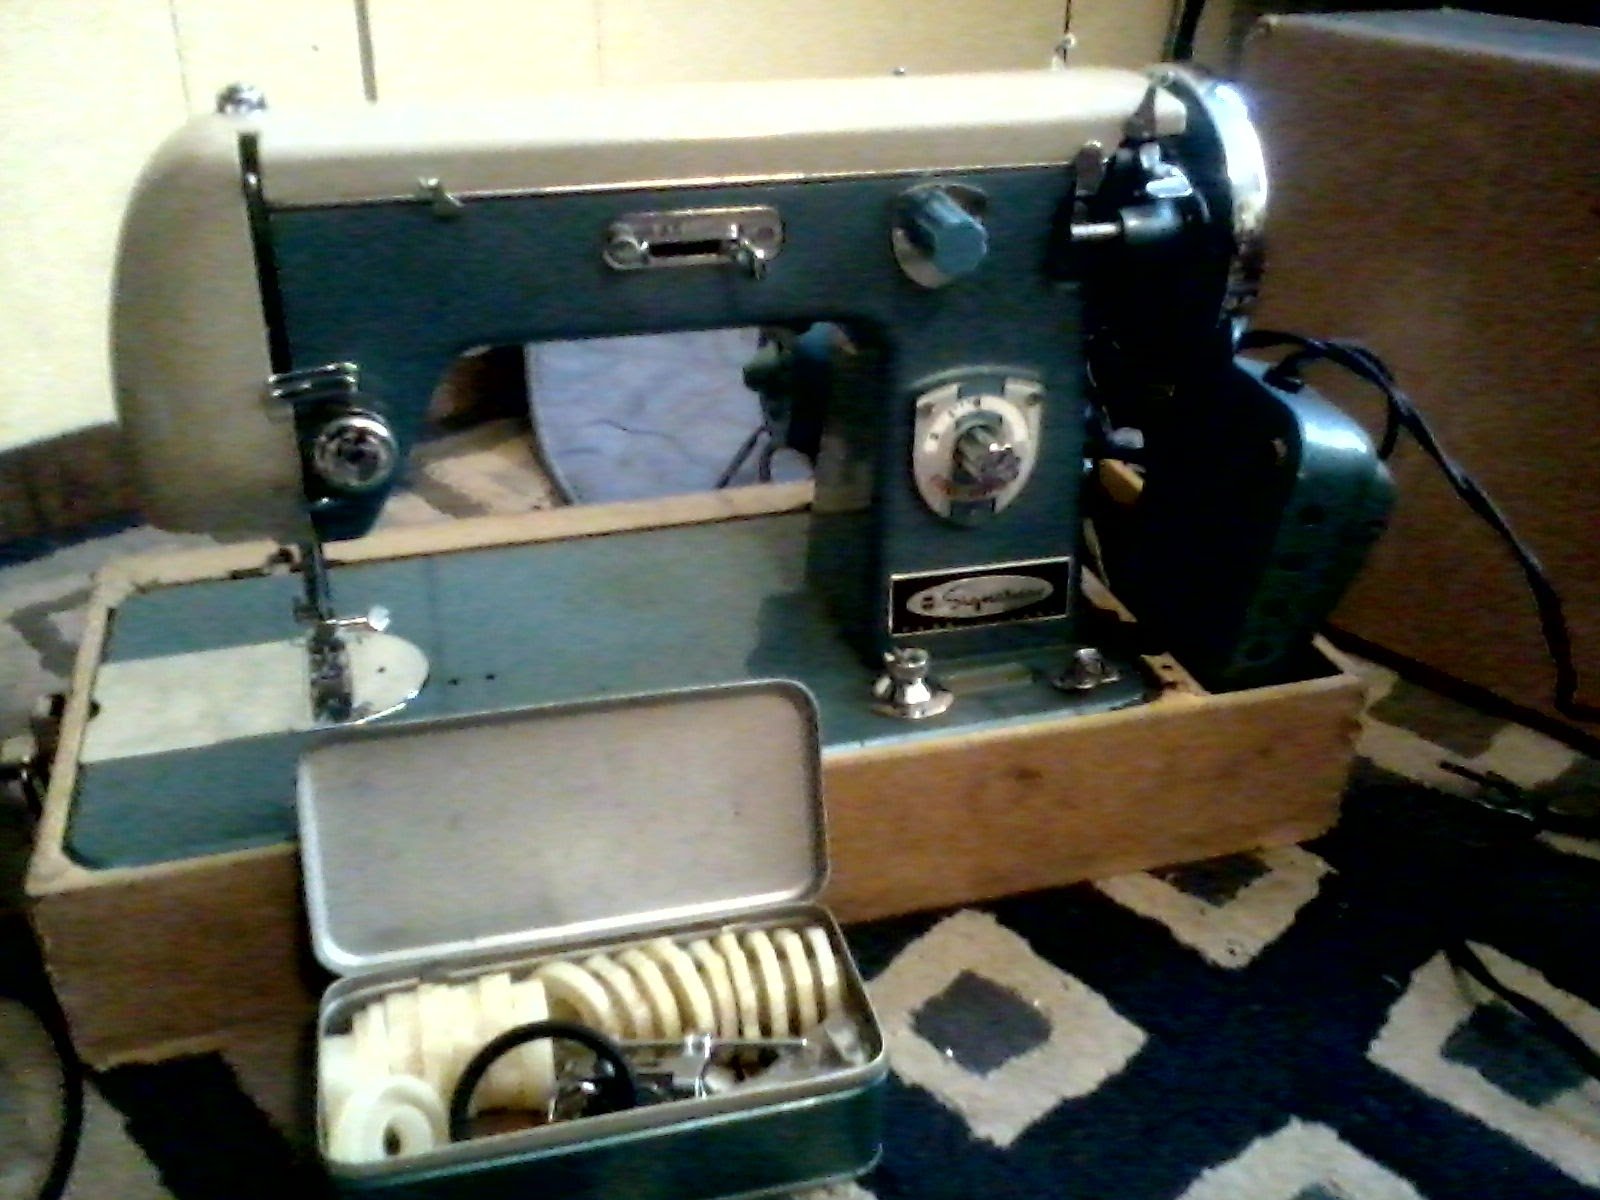 Vintage Modern Super Deluxe Automatic Zigzag sewing machine in